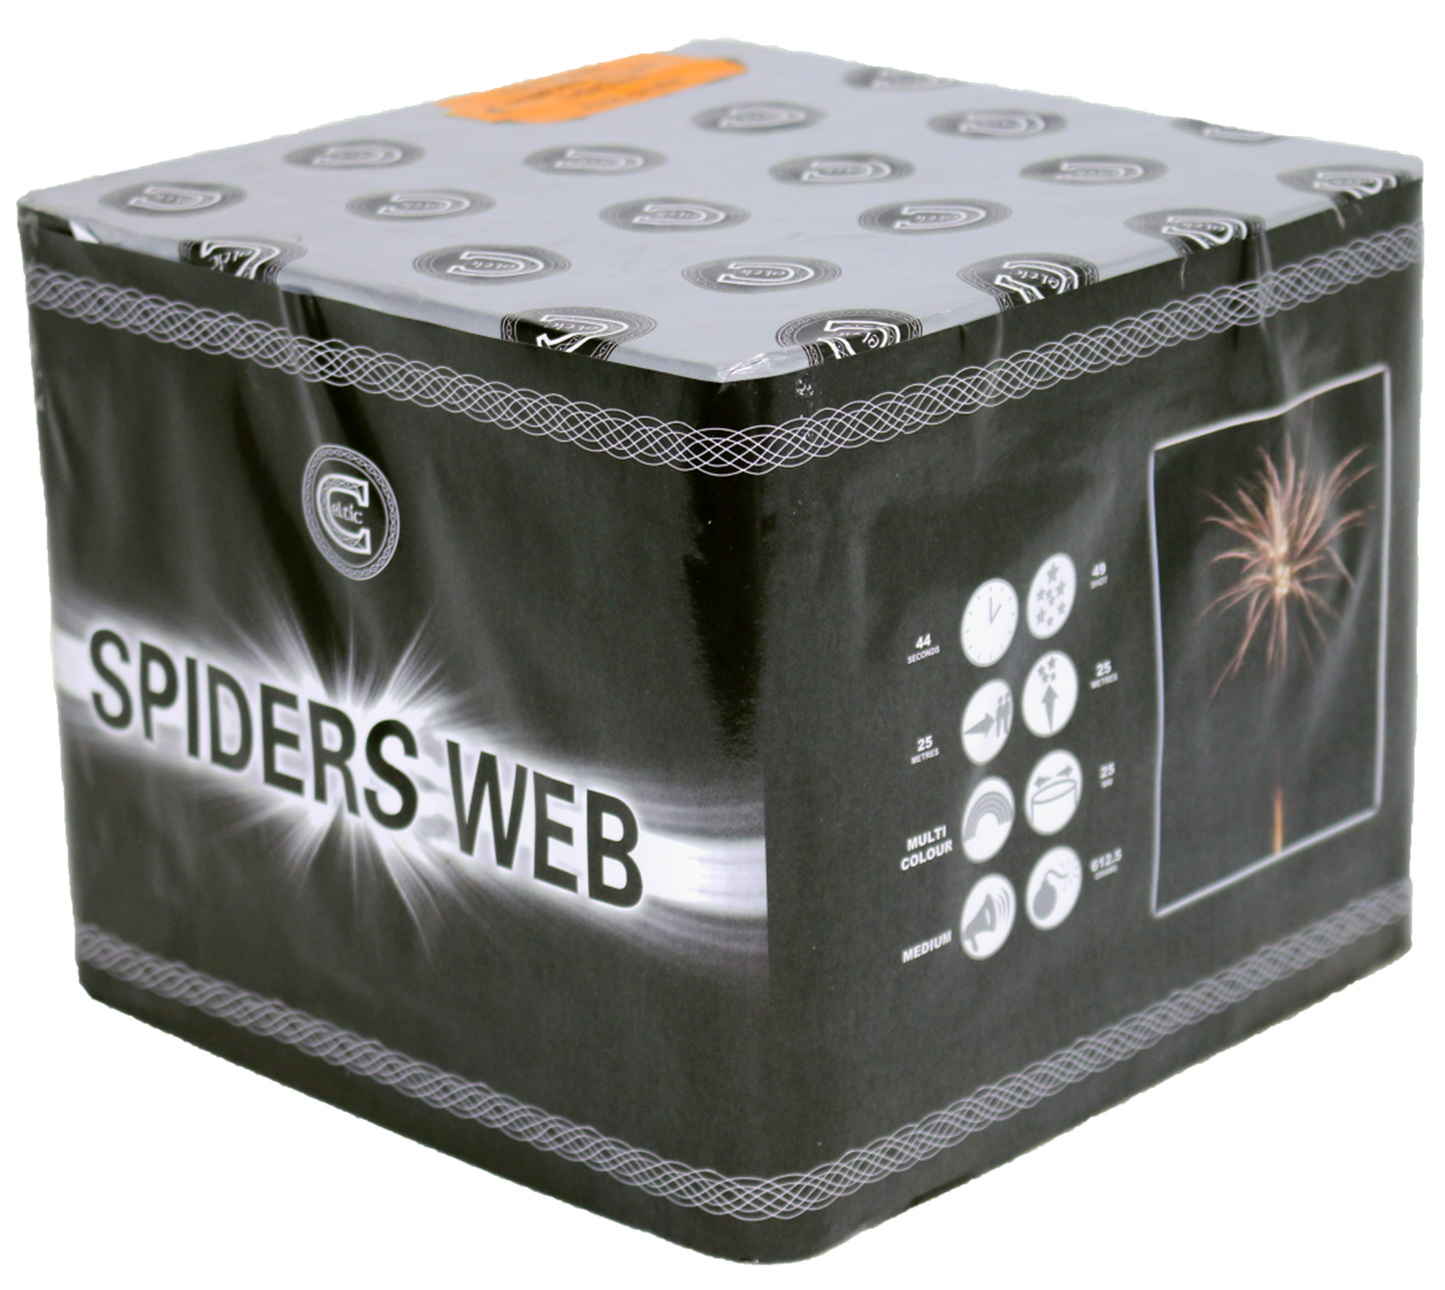 Spiders Web by Celtic Fireworks